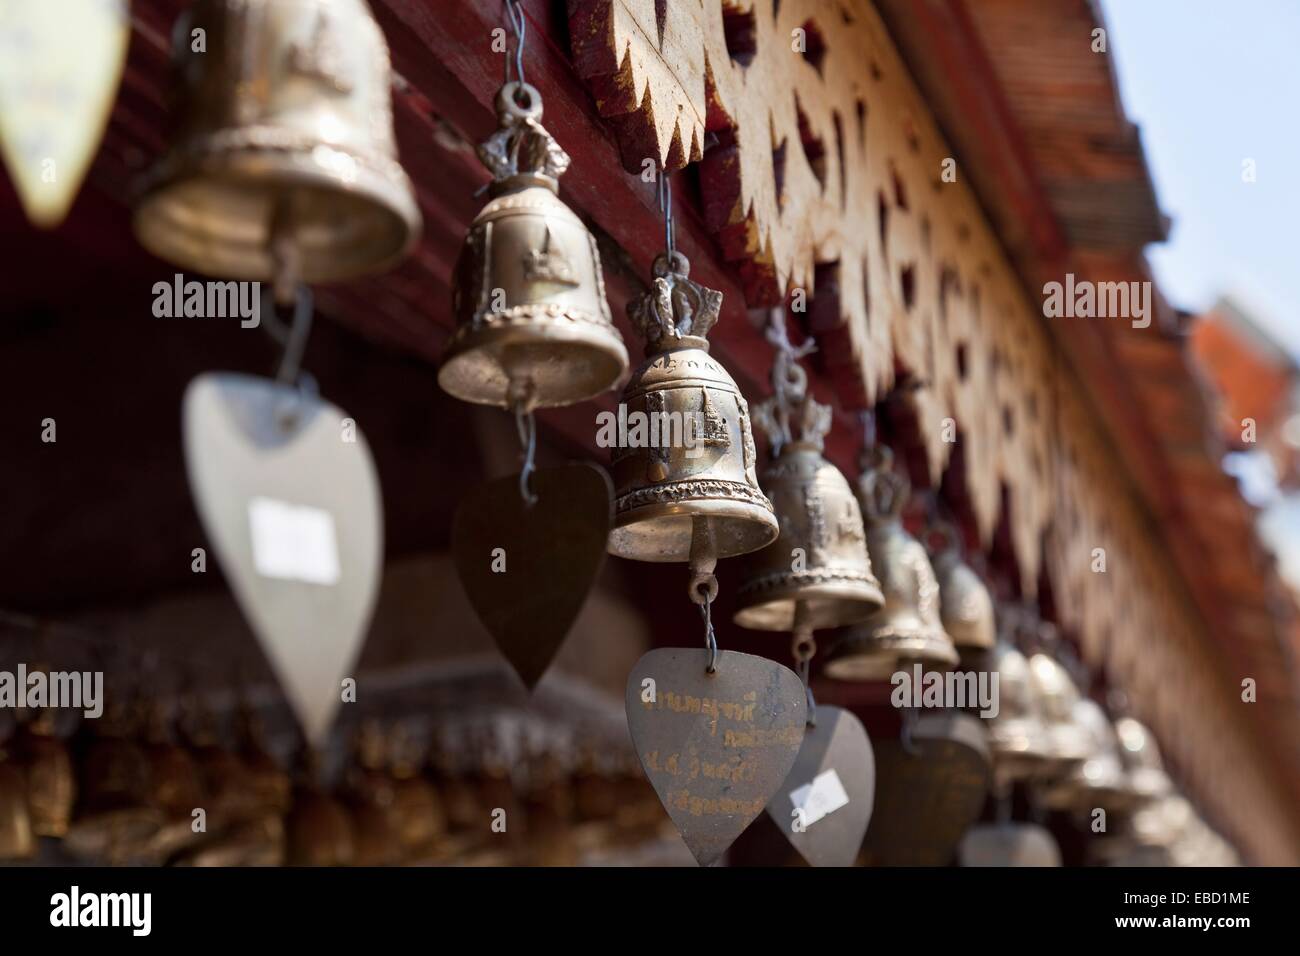 Row of small prayer bells bearing personal messages, Wat Phrathat Doi Suthep, Chiang Mai Province, Thailand Stock Photo